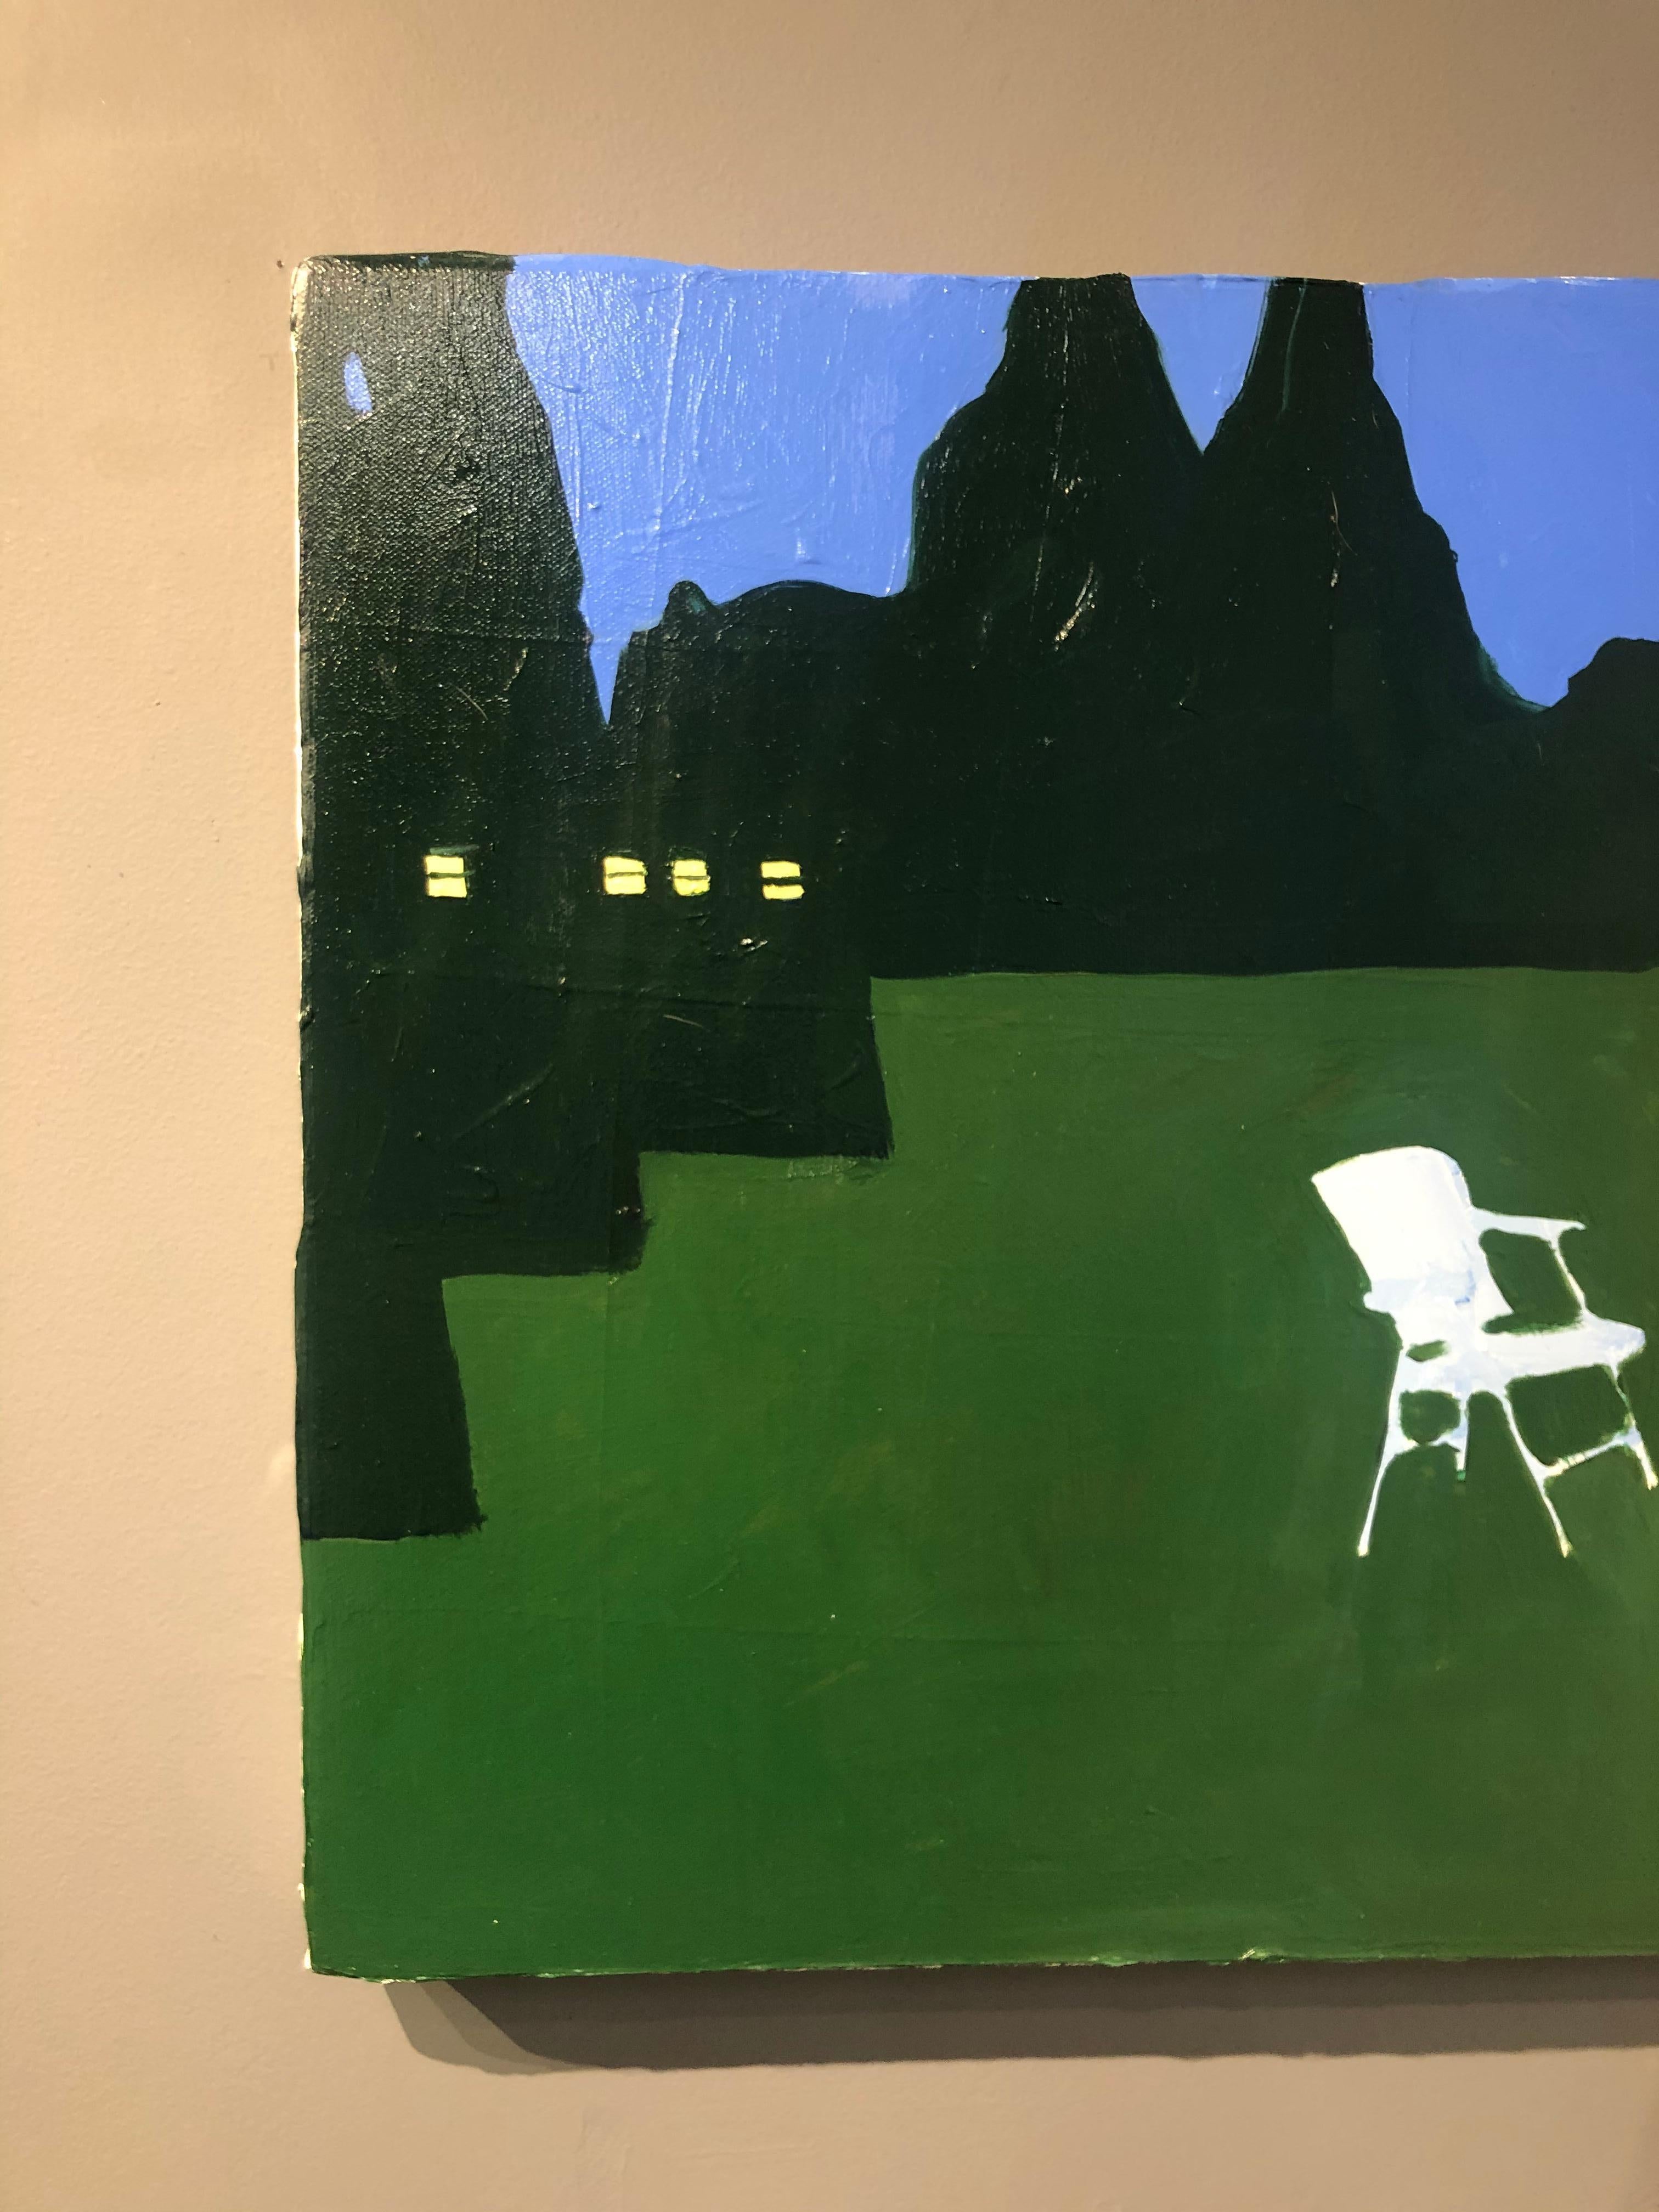 Chairs in Chief Michigan, Blue, Green Night Landscape Painting, Lawn and House 2